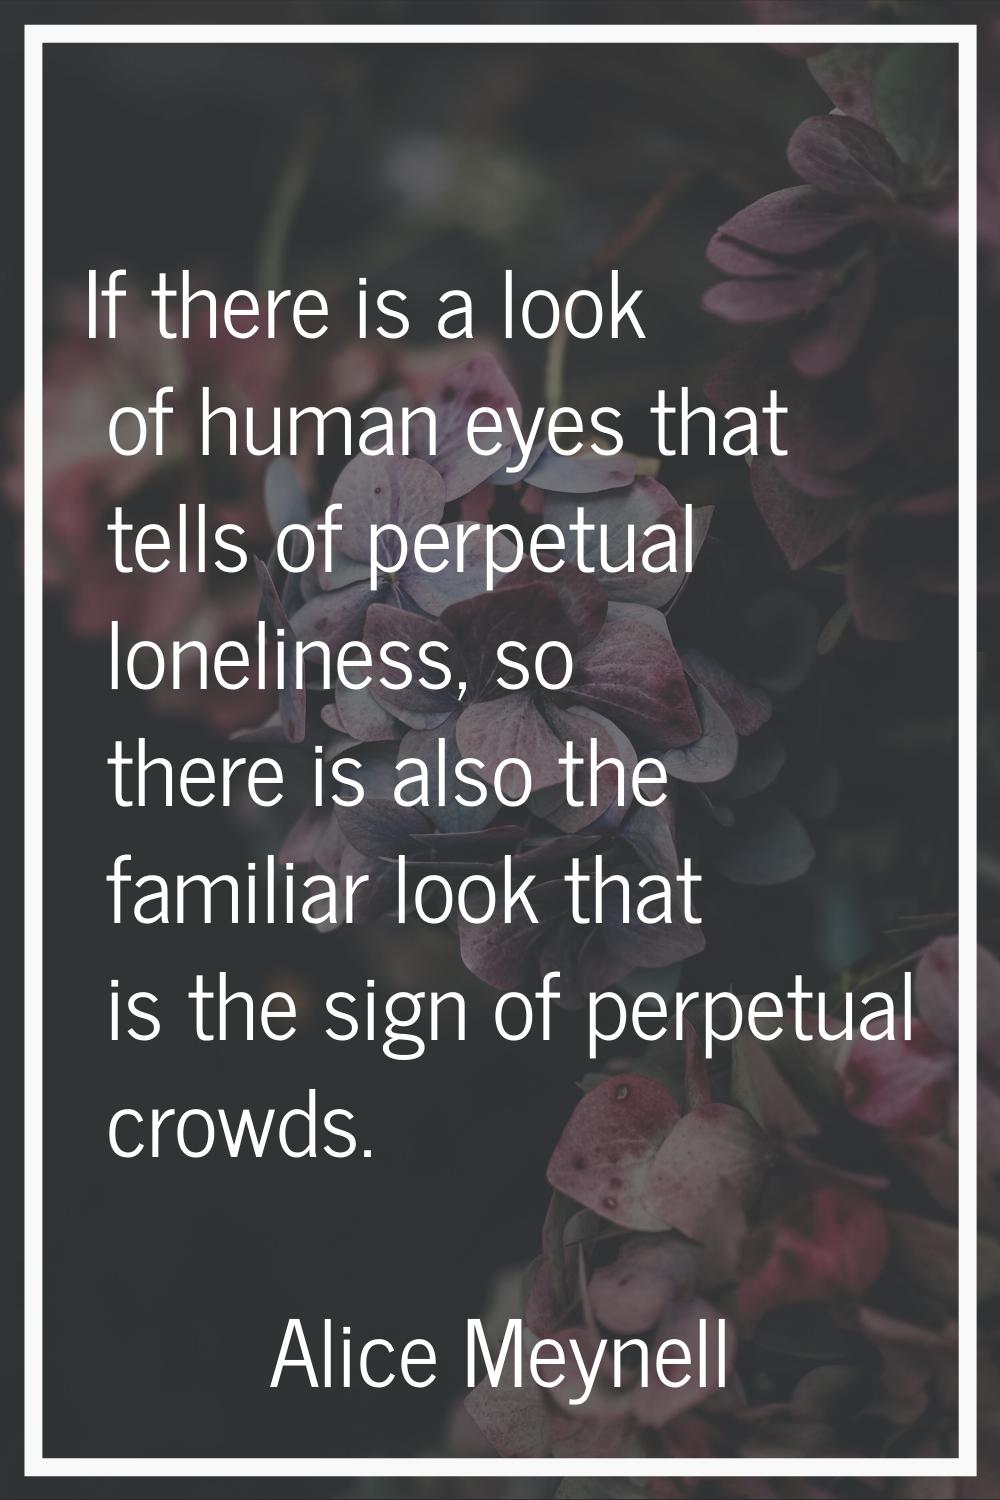 If there is a look of human eyes that tells of perpetual loneliness, so there is also the familiar 